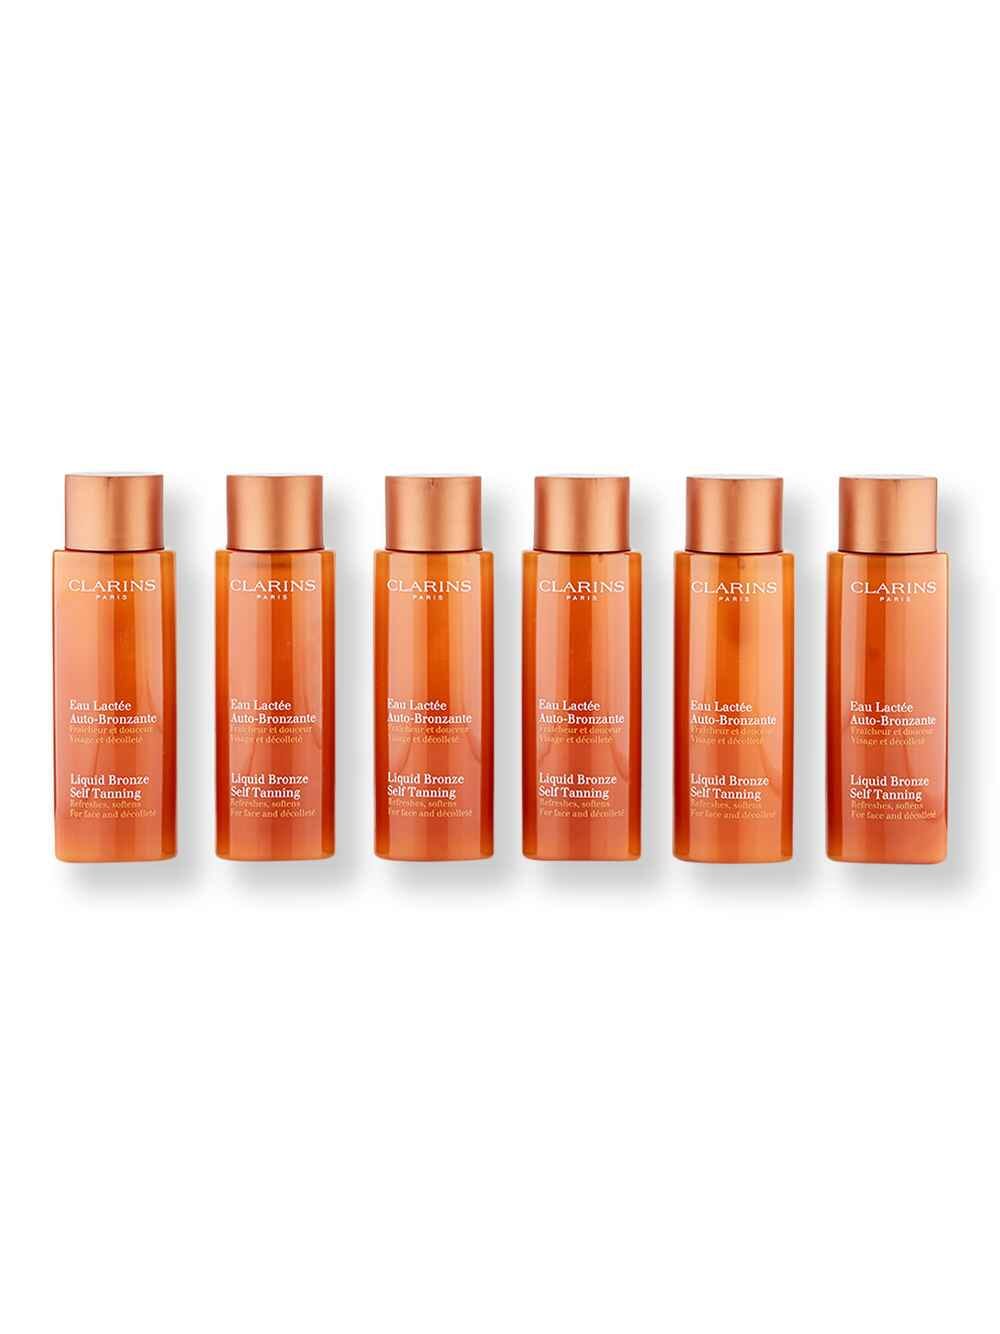 Clarins Clarins Liquid Bronze Self-Tanning For Face and Decollete 6 ct 4.2 oz Self-Tanning & Bronzing 